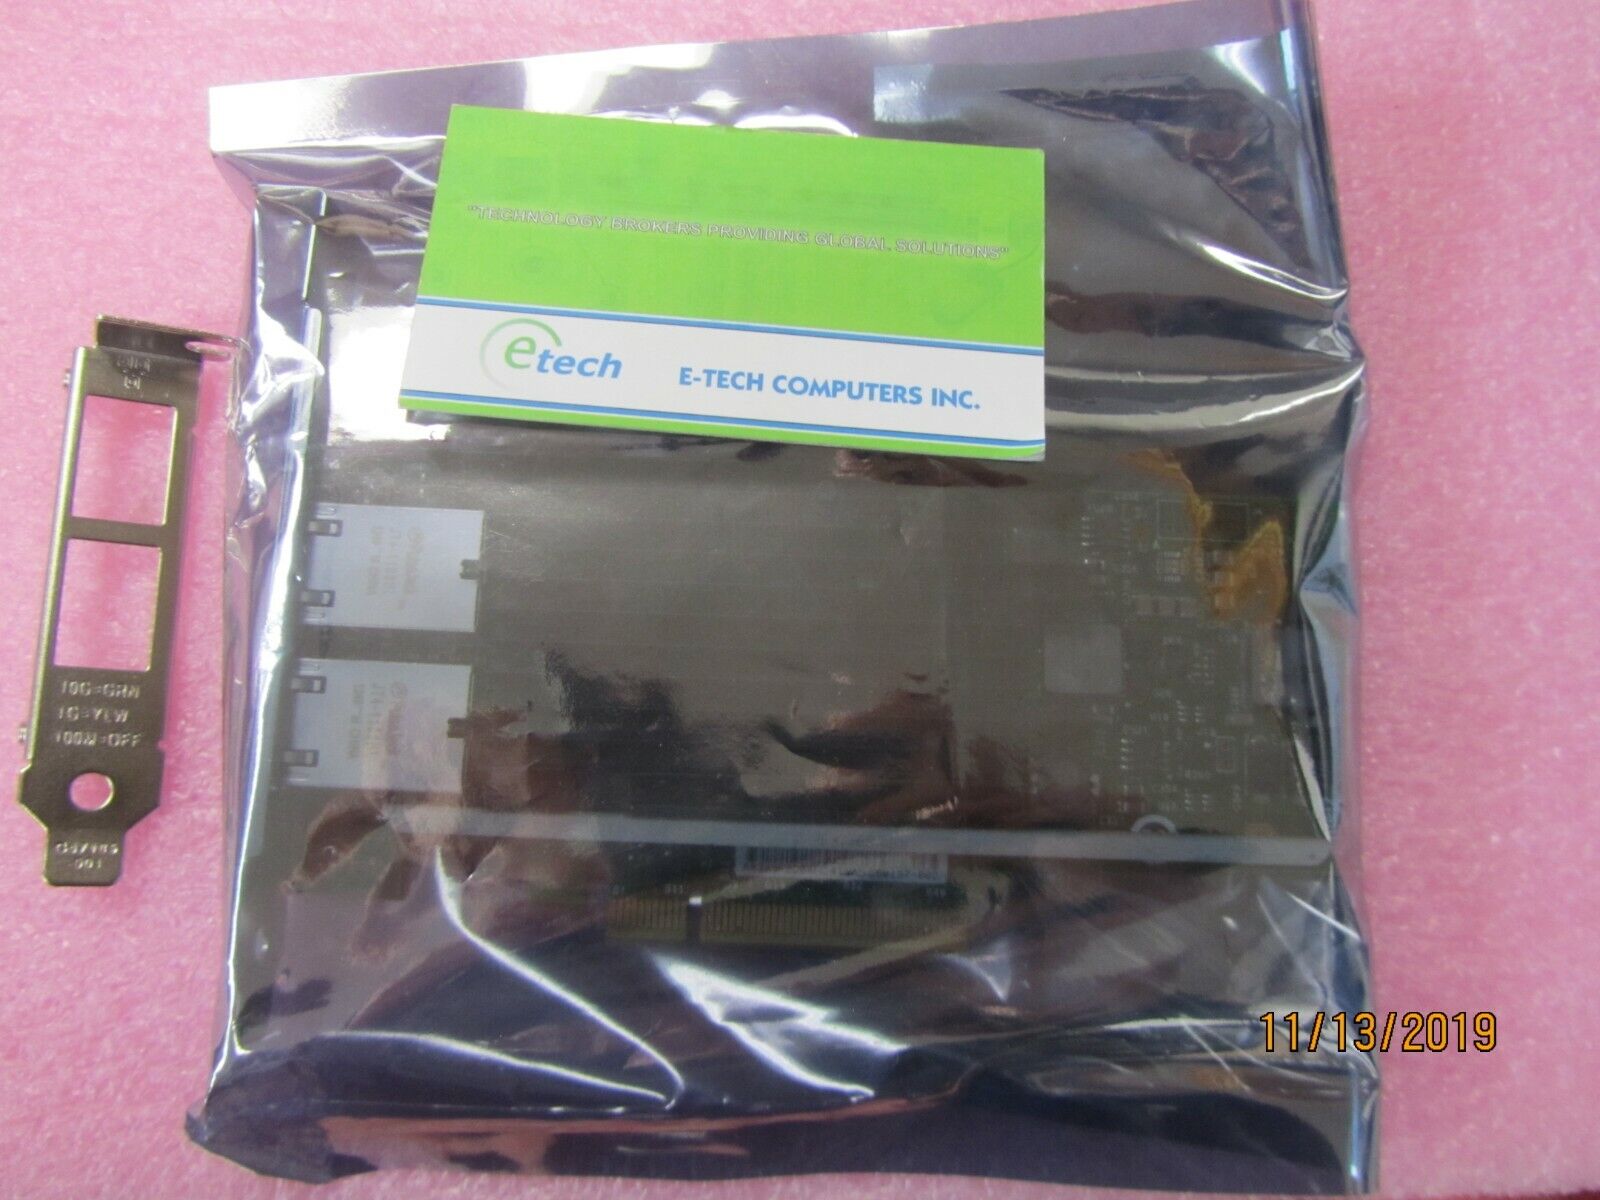 49Y7972 - Intel X540-T2 Dual-Port 10GBaseT Adapter for IBM System x, OPT 49Y7970